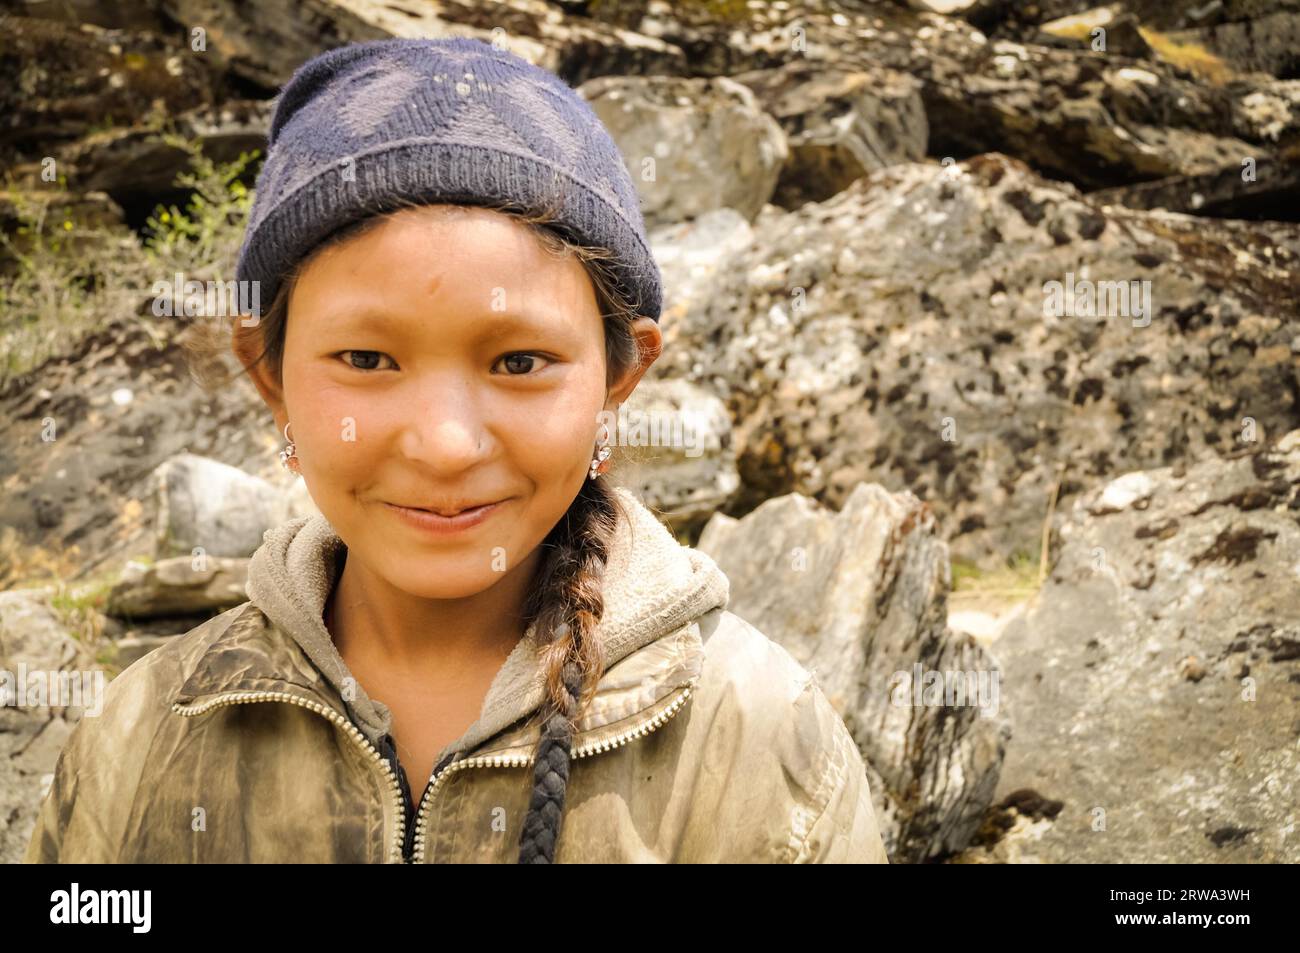 Dolpo, Nepal, circa June 2012: Young brown-haired girl with blue cap and earrings wears brown sweatshirt in beautiful mountains in Dolpo, Nepal. Stock Photo